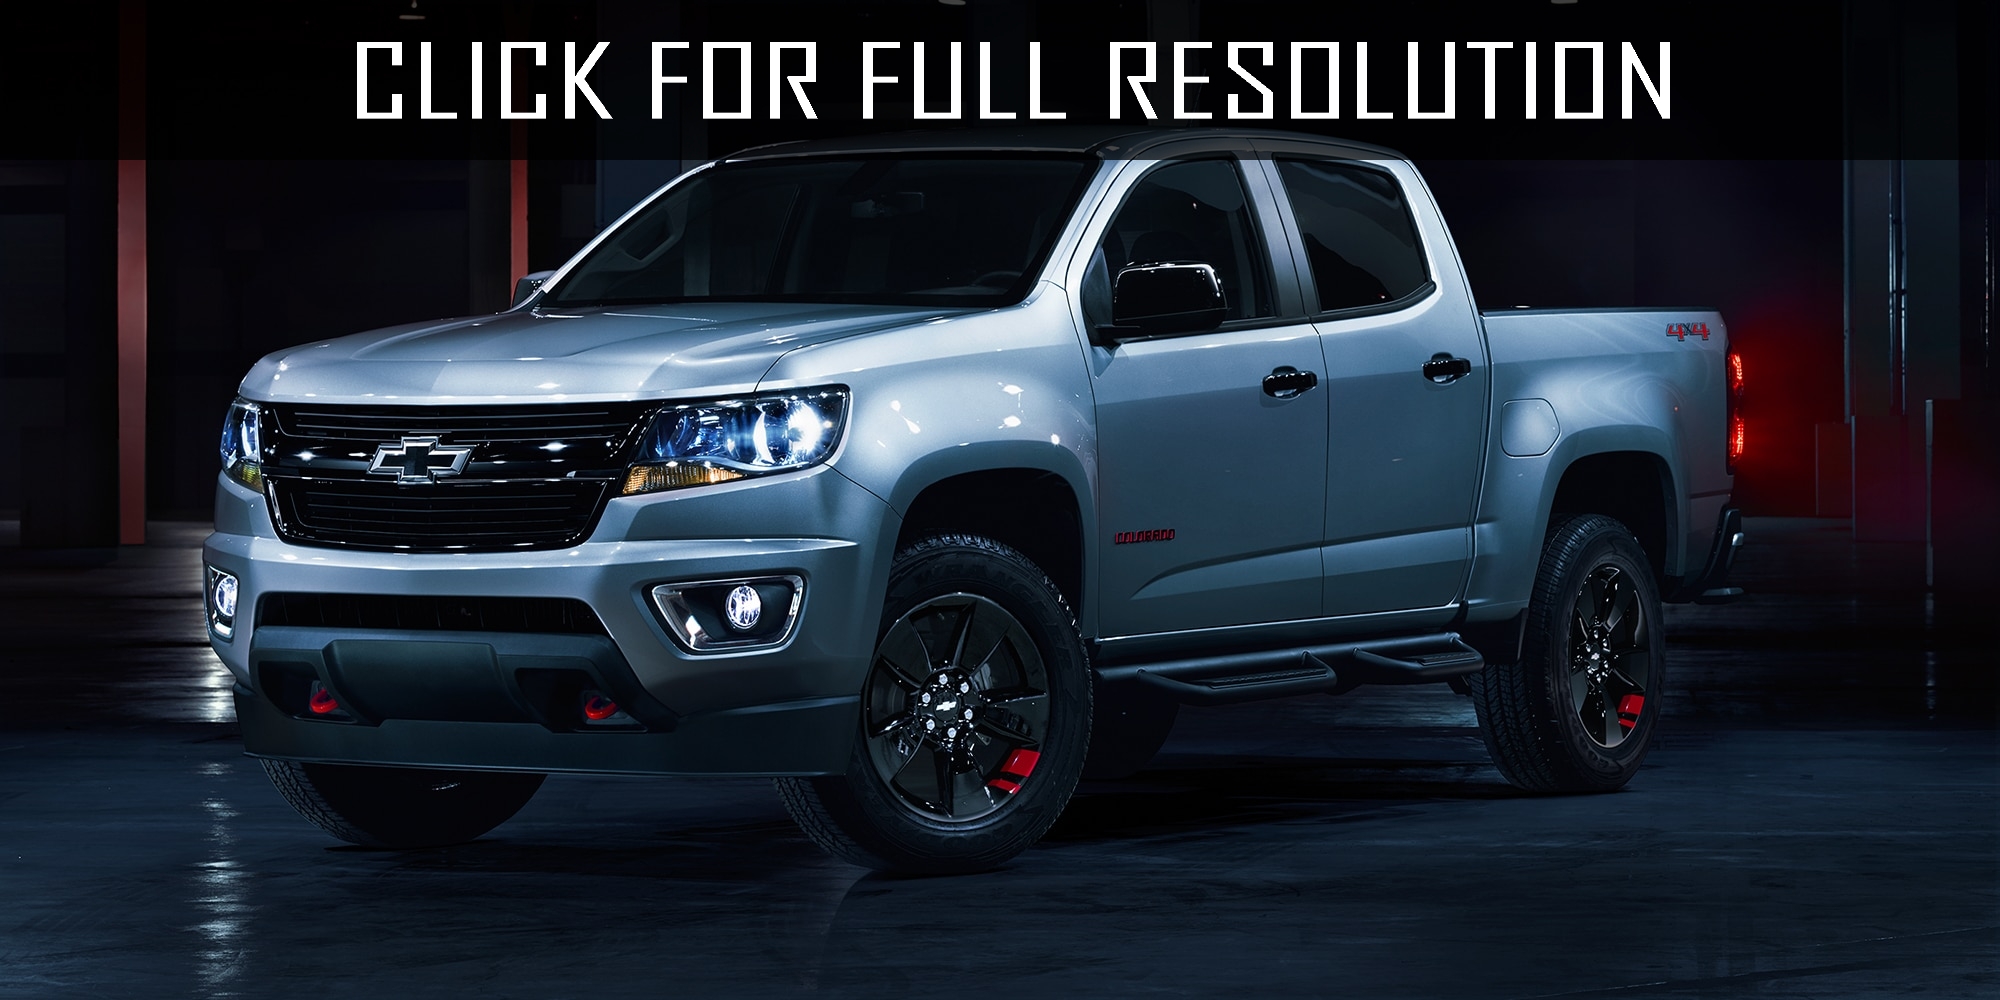 Chevrolet Colorado Zr1 amazing photo gallery, some information and